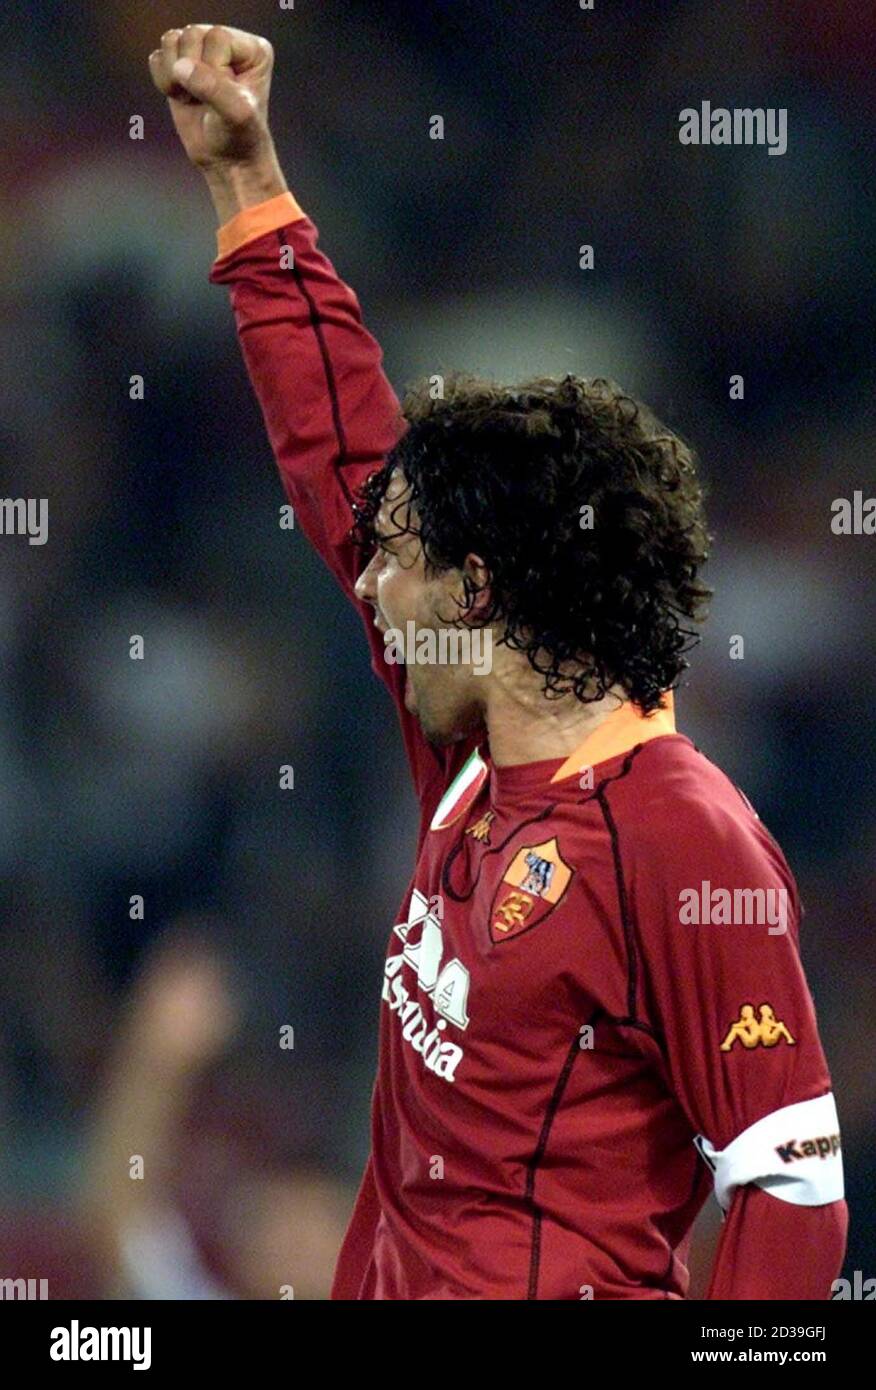 AS Roma player Damiano Tommasi celebrates after scoring against Udinese  during their Serie A soccer match at Rome's Olympic stadium September 8,  2001. REUTERS/Paolo Cocco REUTERS PC Stock Photo - Alamy